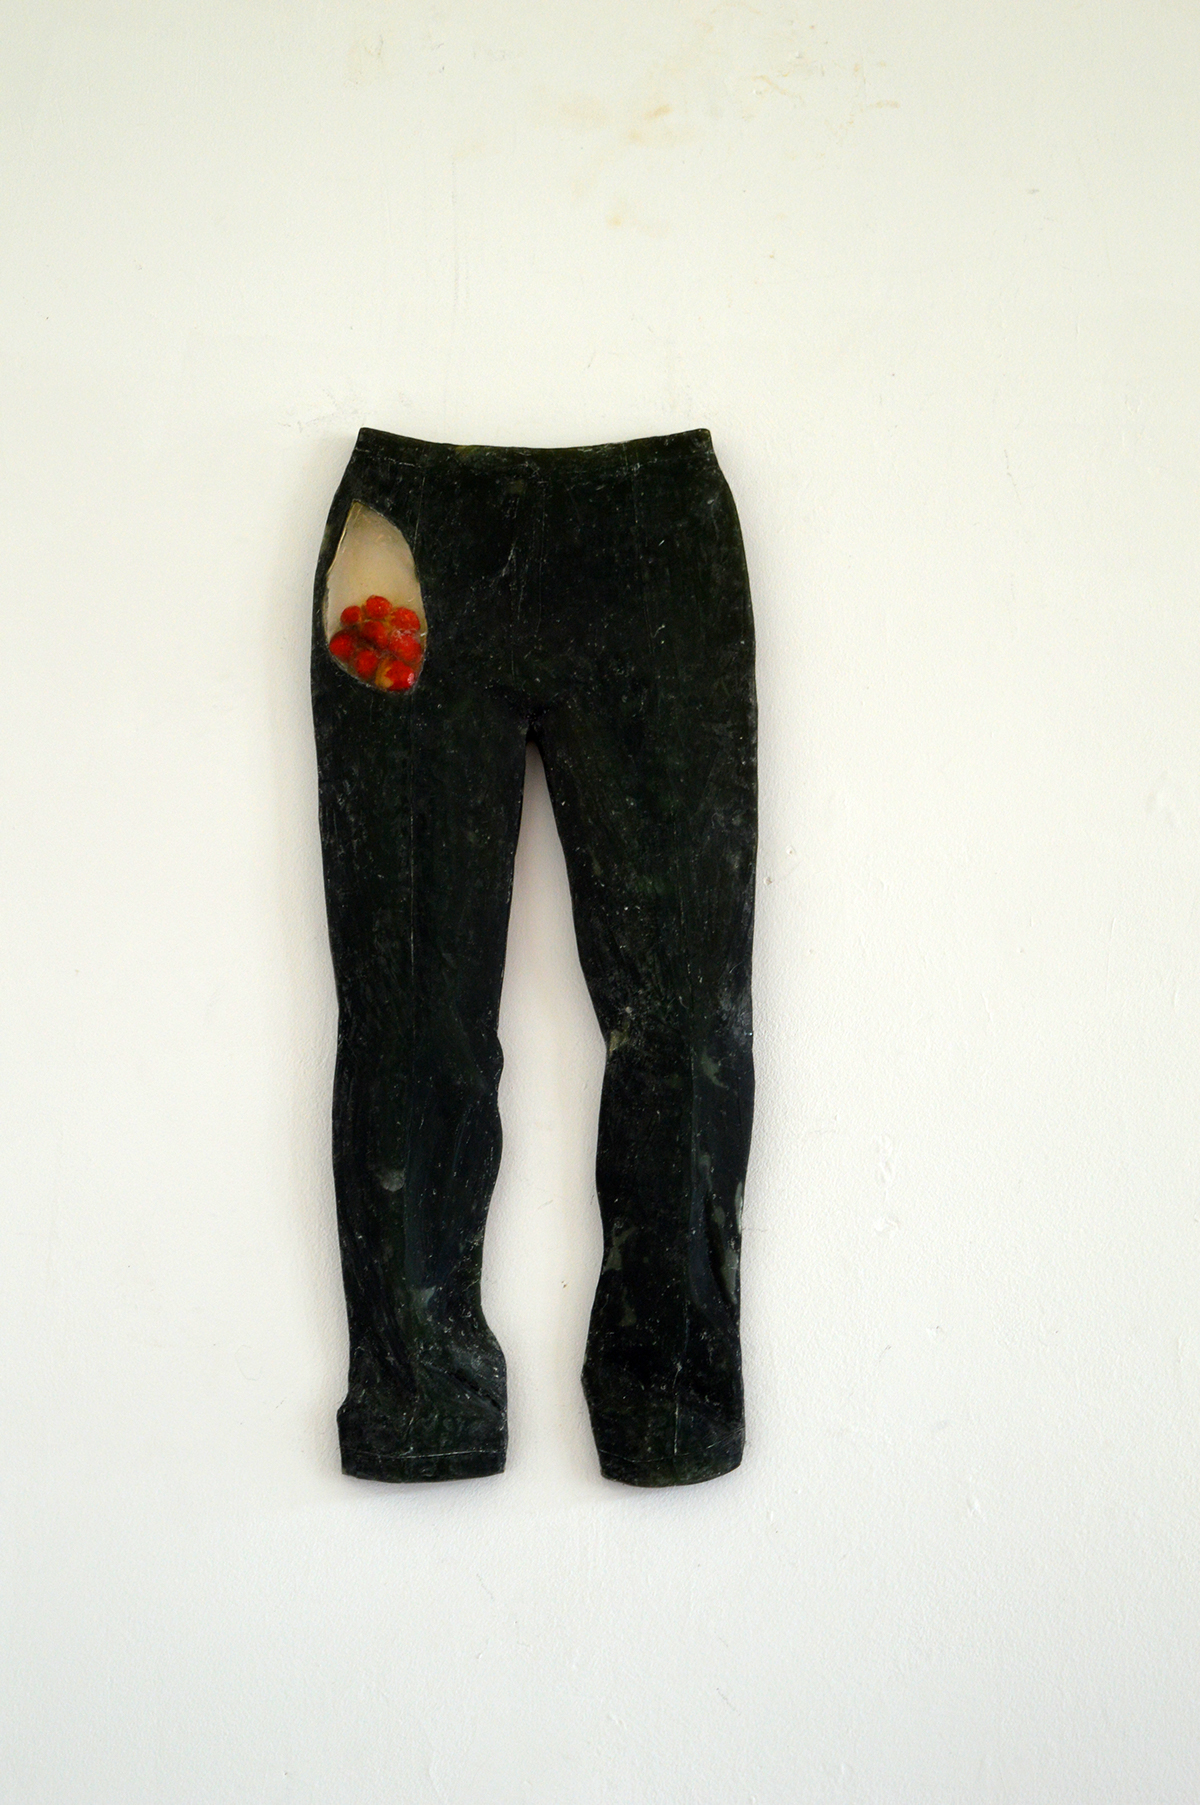 strawberries in the pocket transparent relief sculpture pants